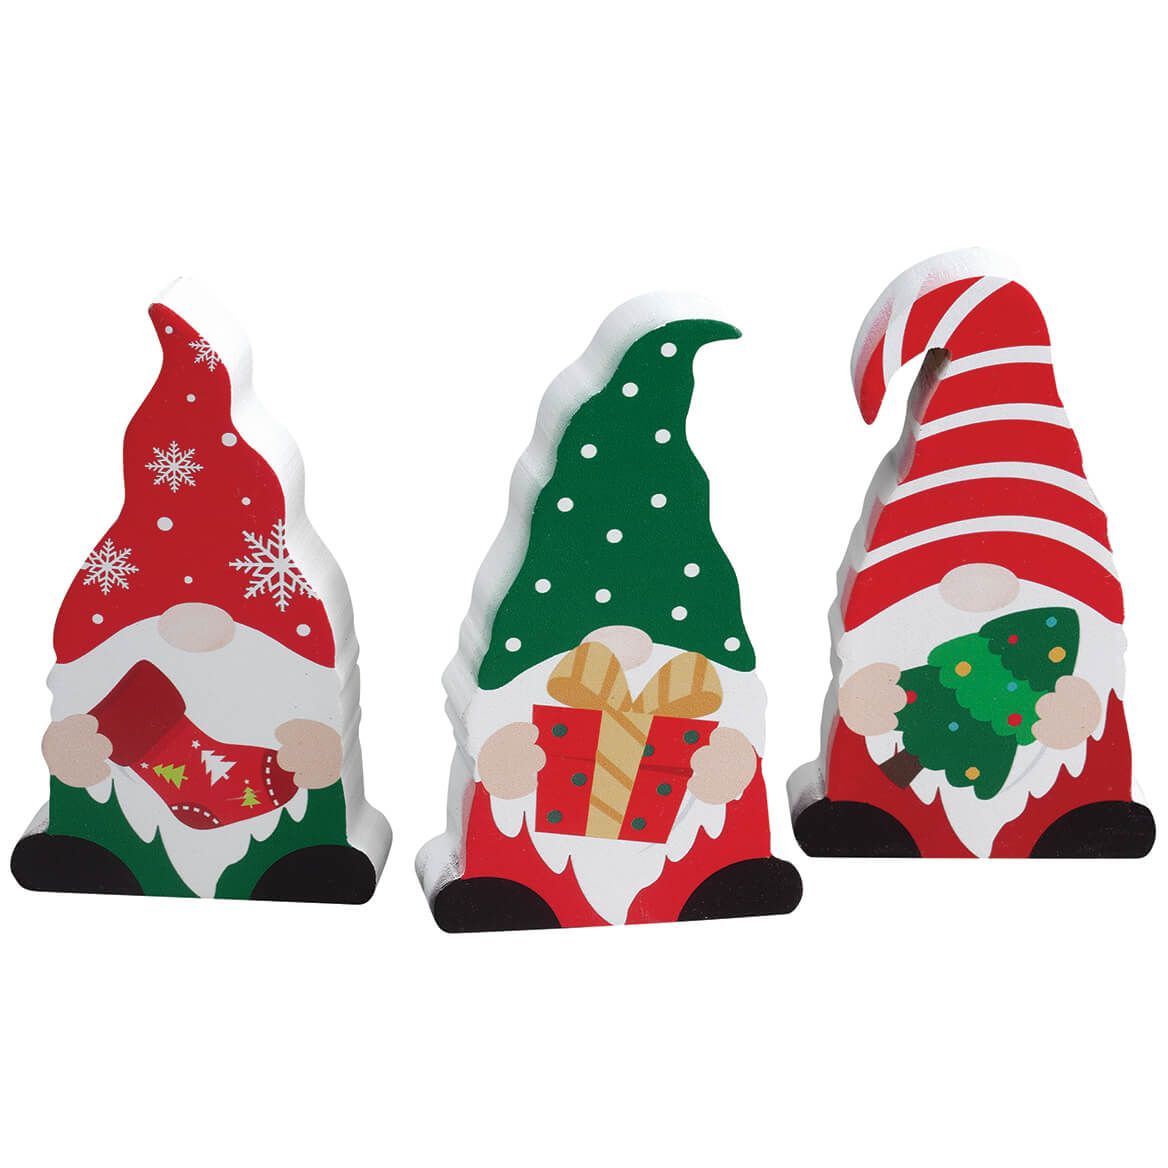 Christmas Gnome Table Sitters by Holiday Peak™, Set of 3 + '-' + 373900